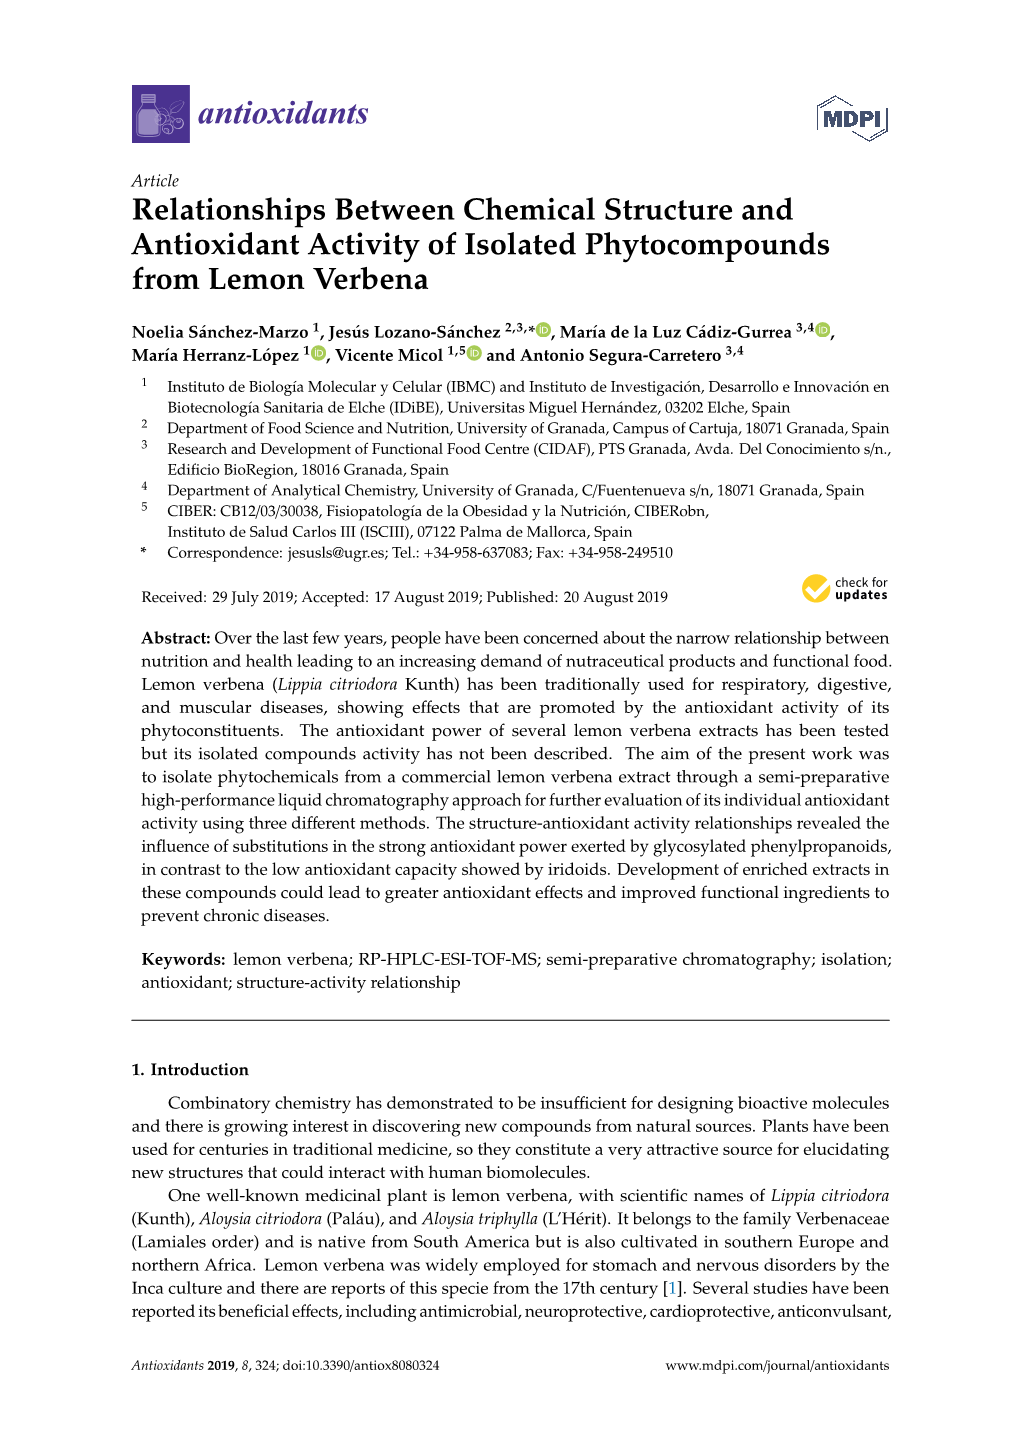 Relationships Between Chemical Structure and Antioxidant Activity of Isolated Phytocompounds from Lemon Verbena